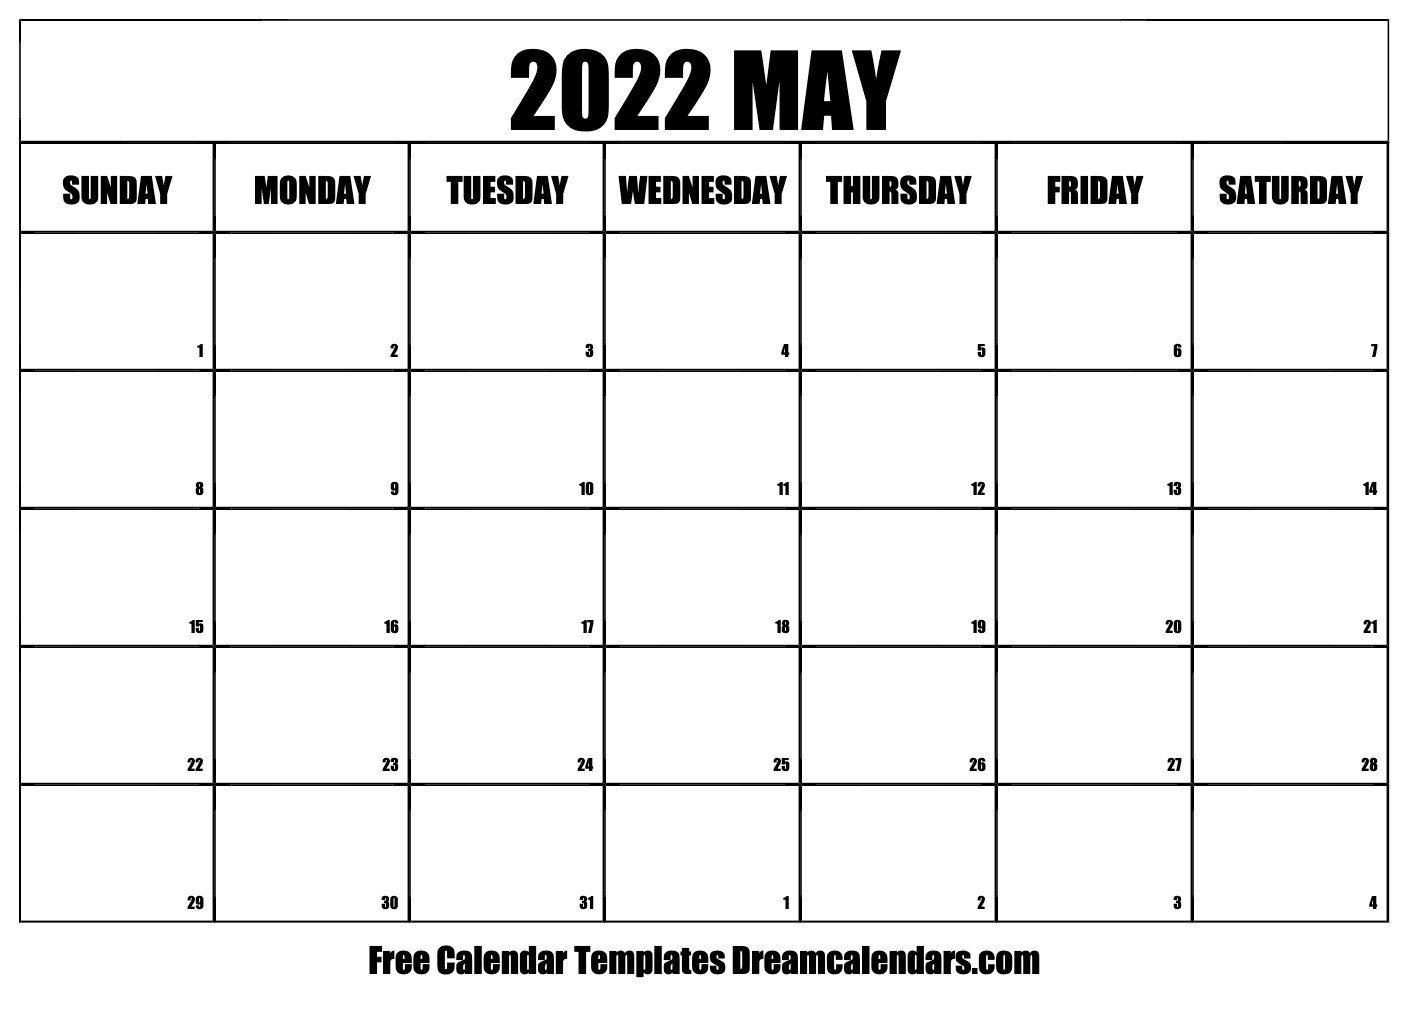 May 2022 Calendar | Free Blank Printable Templates  Calendar For May 2022 With Holidays